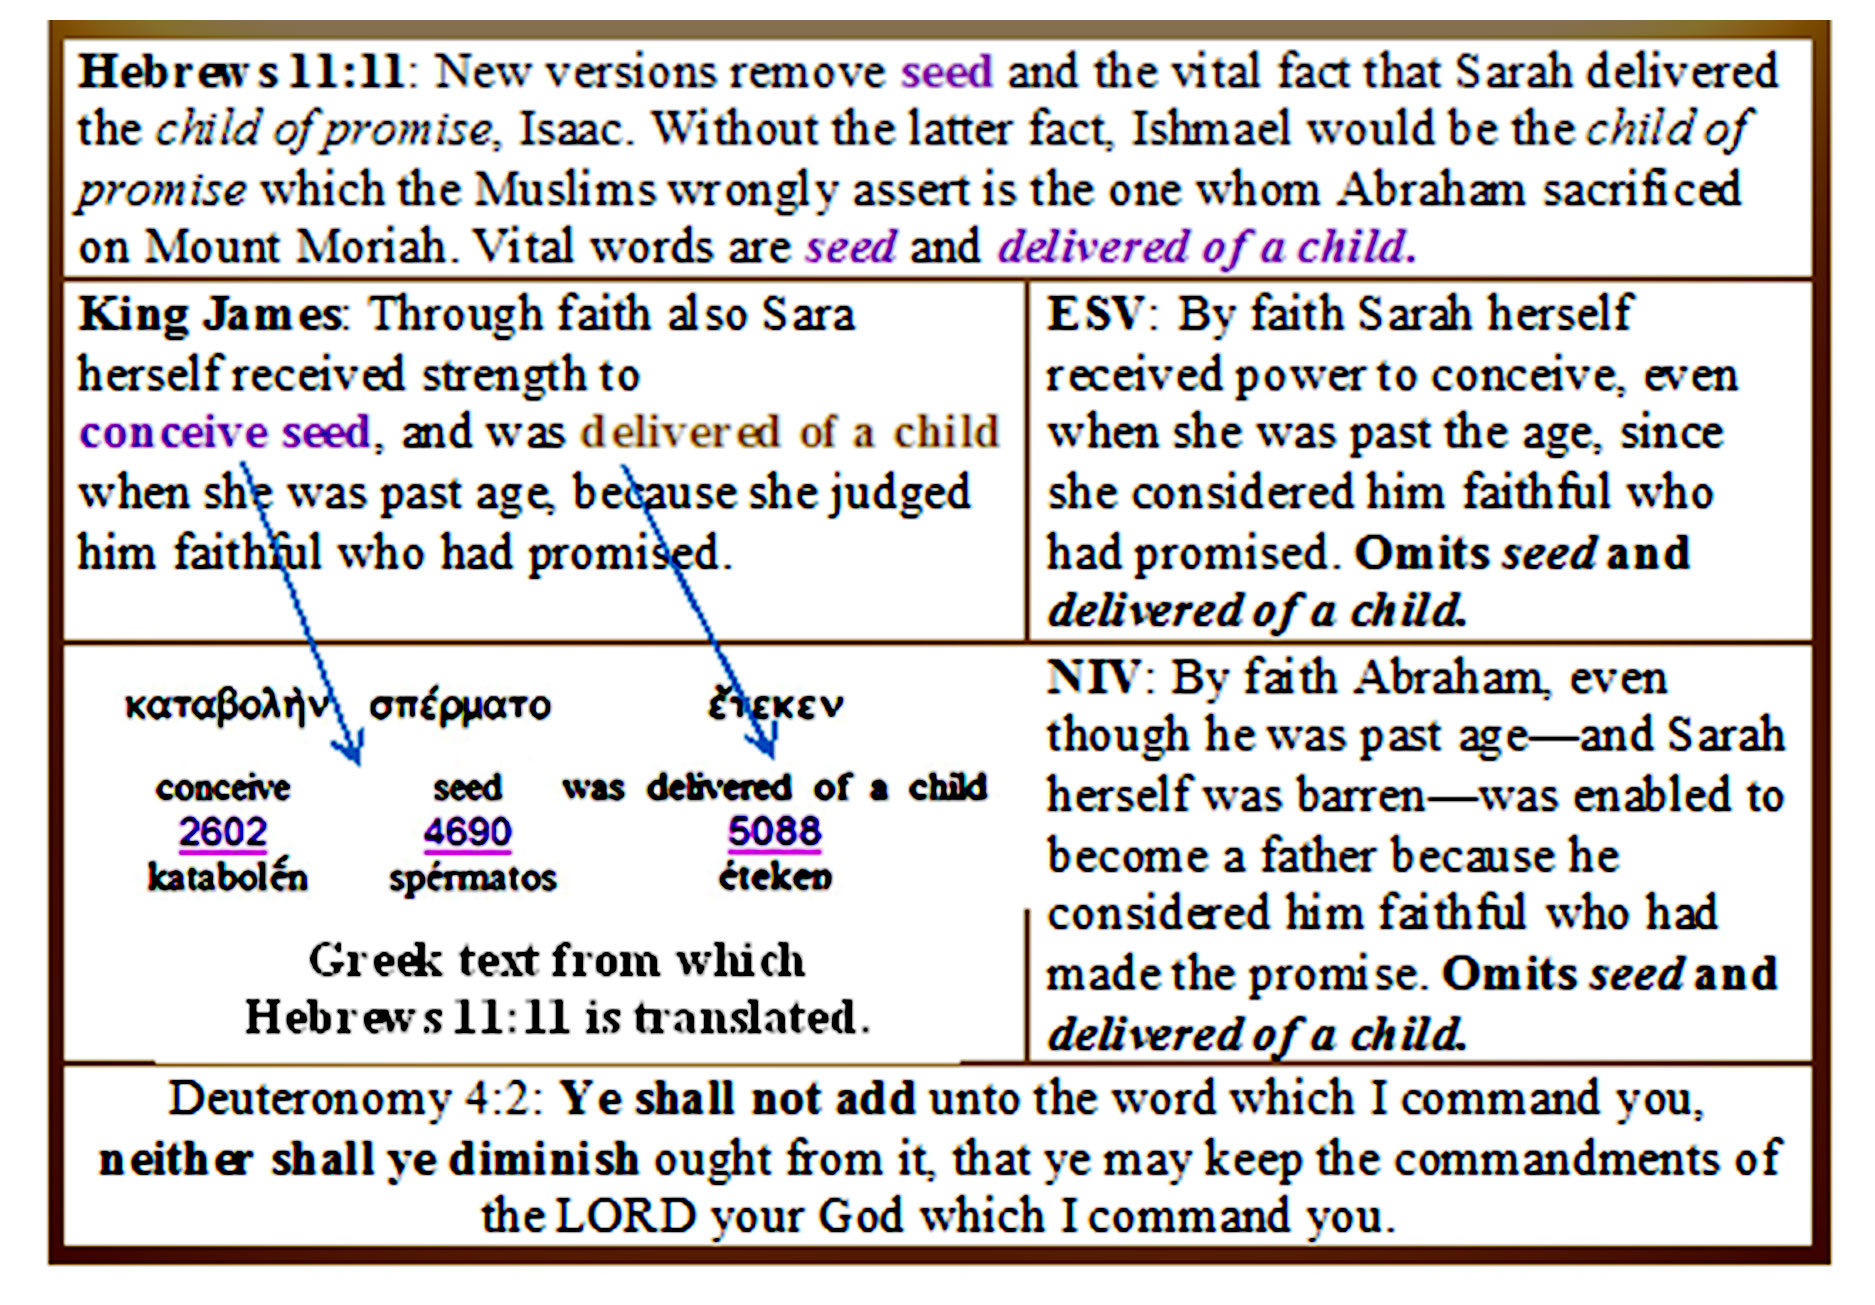 Hebrews 11:11 changed by new versions: omit seed and delivered of a child.